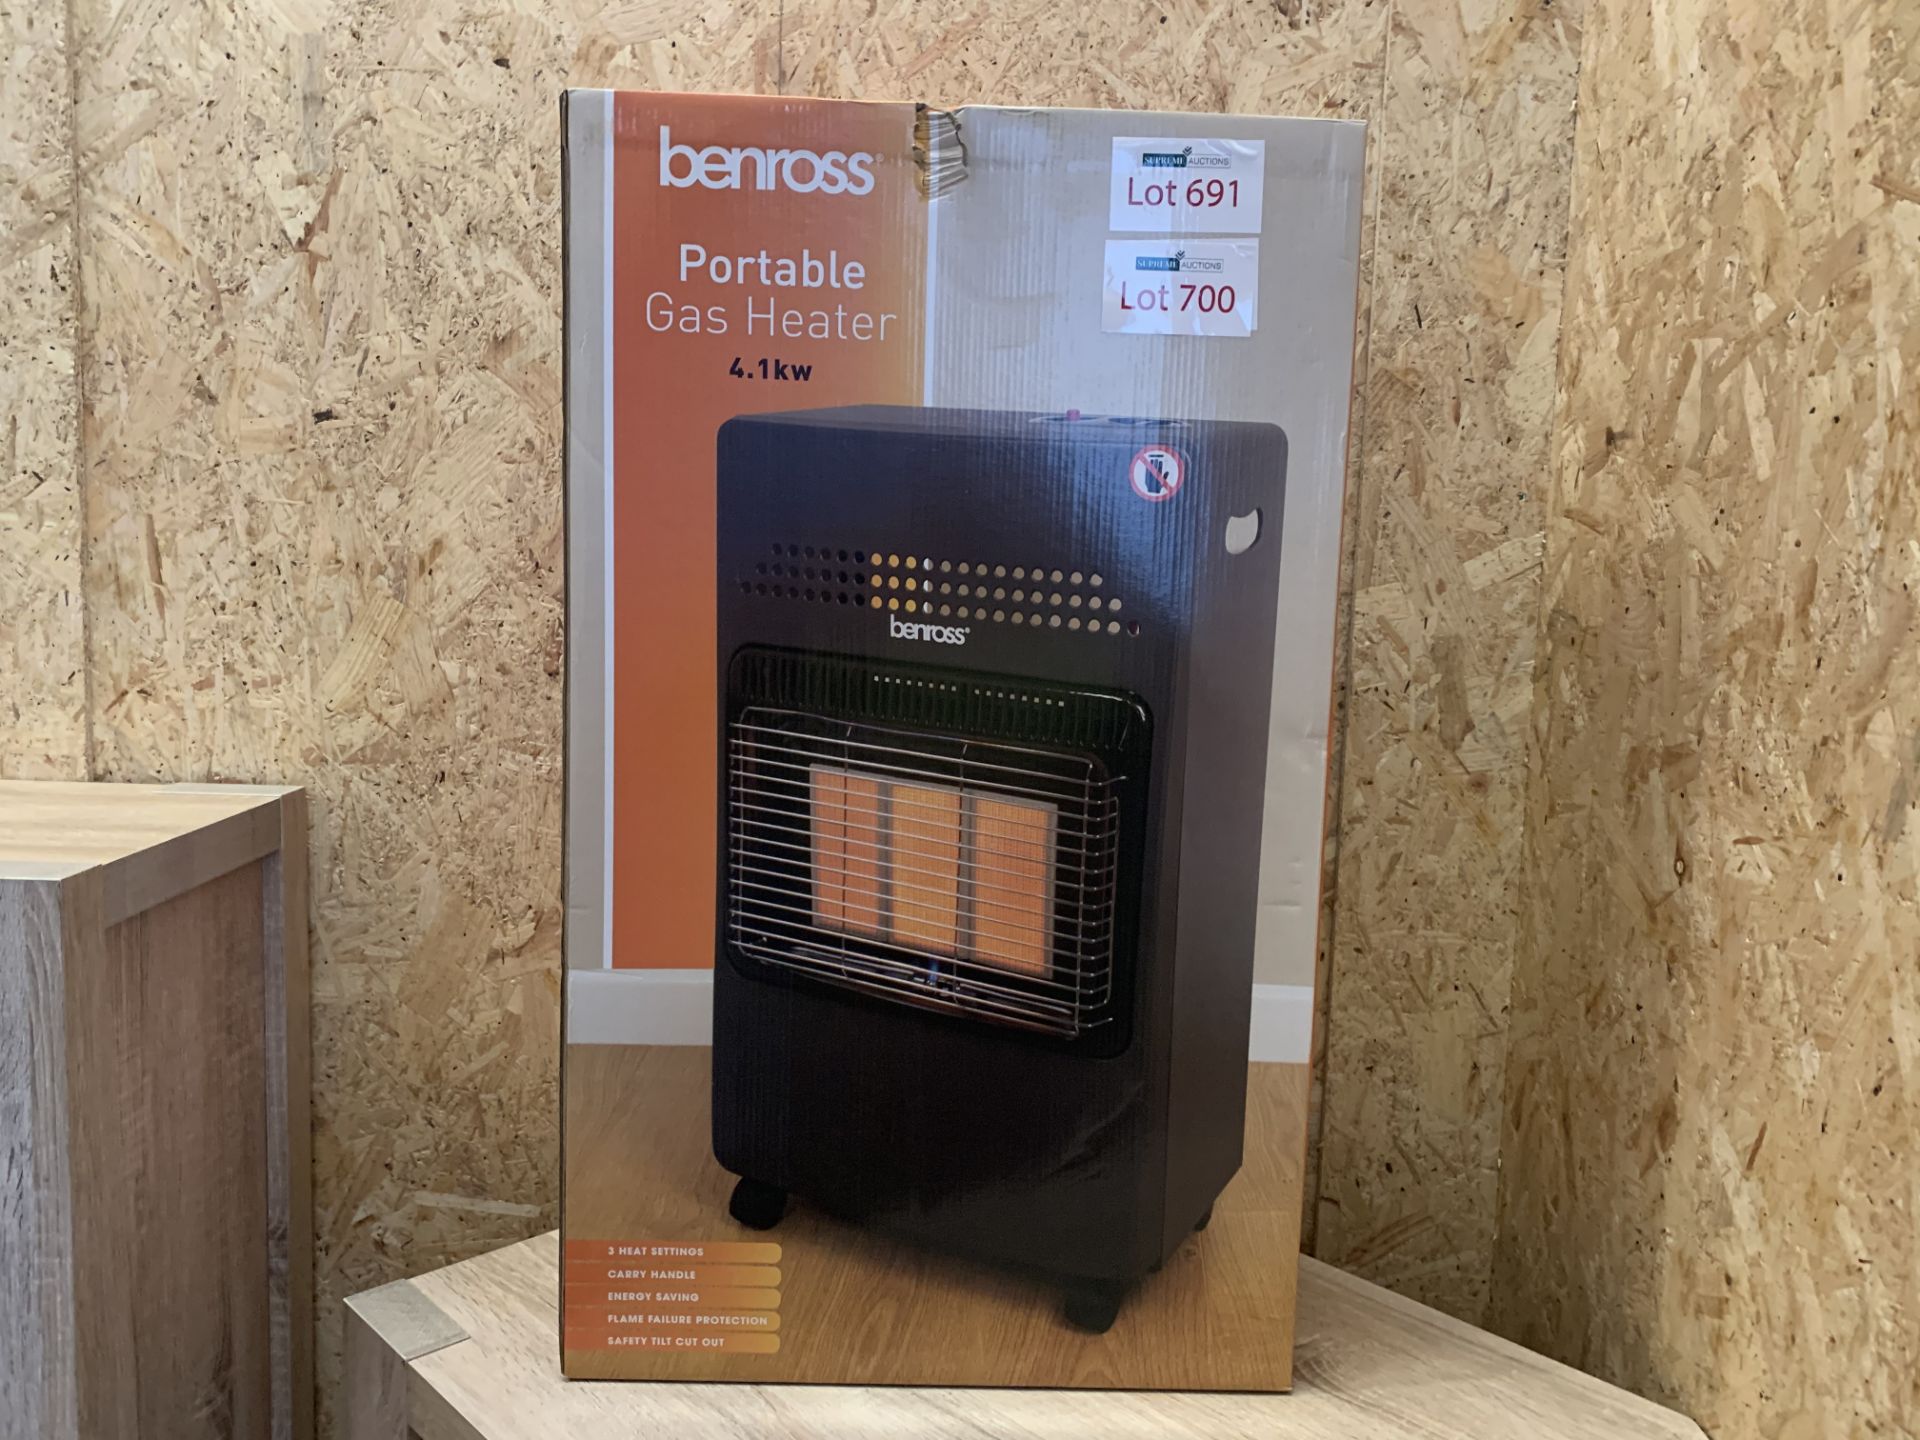 2 X BRAND NEW BOXED BENROSS 4.1KW PORTABLE GAS HEATERS